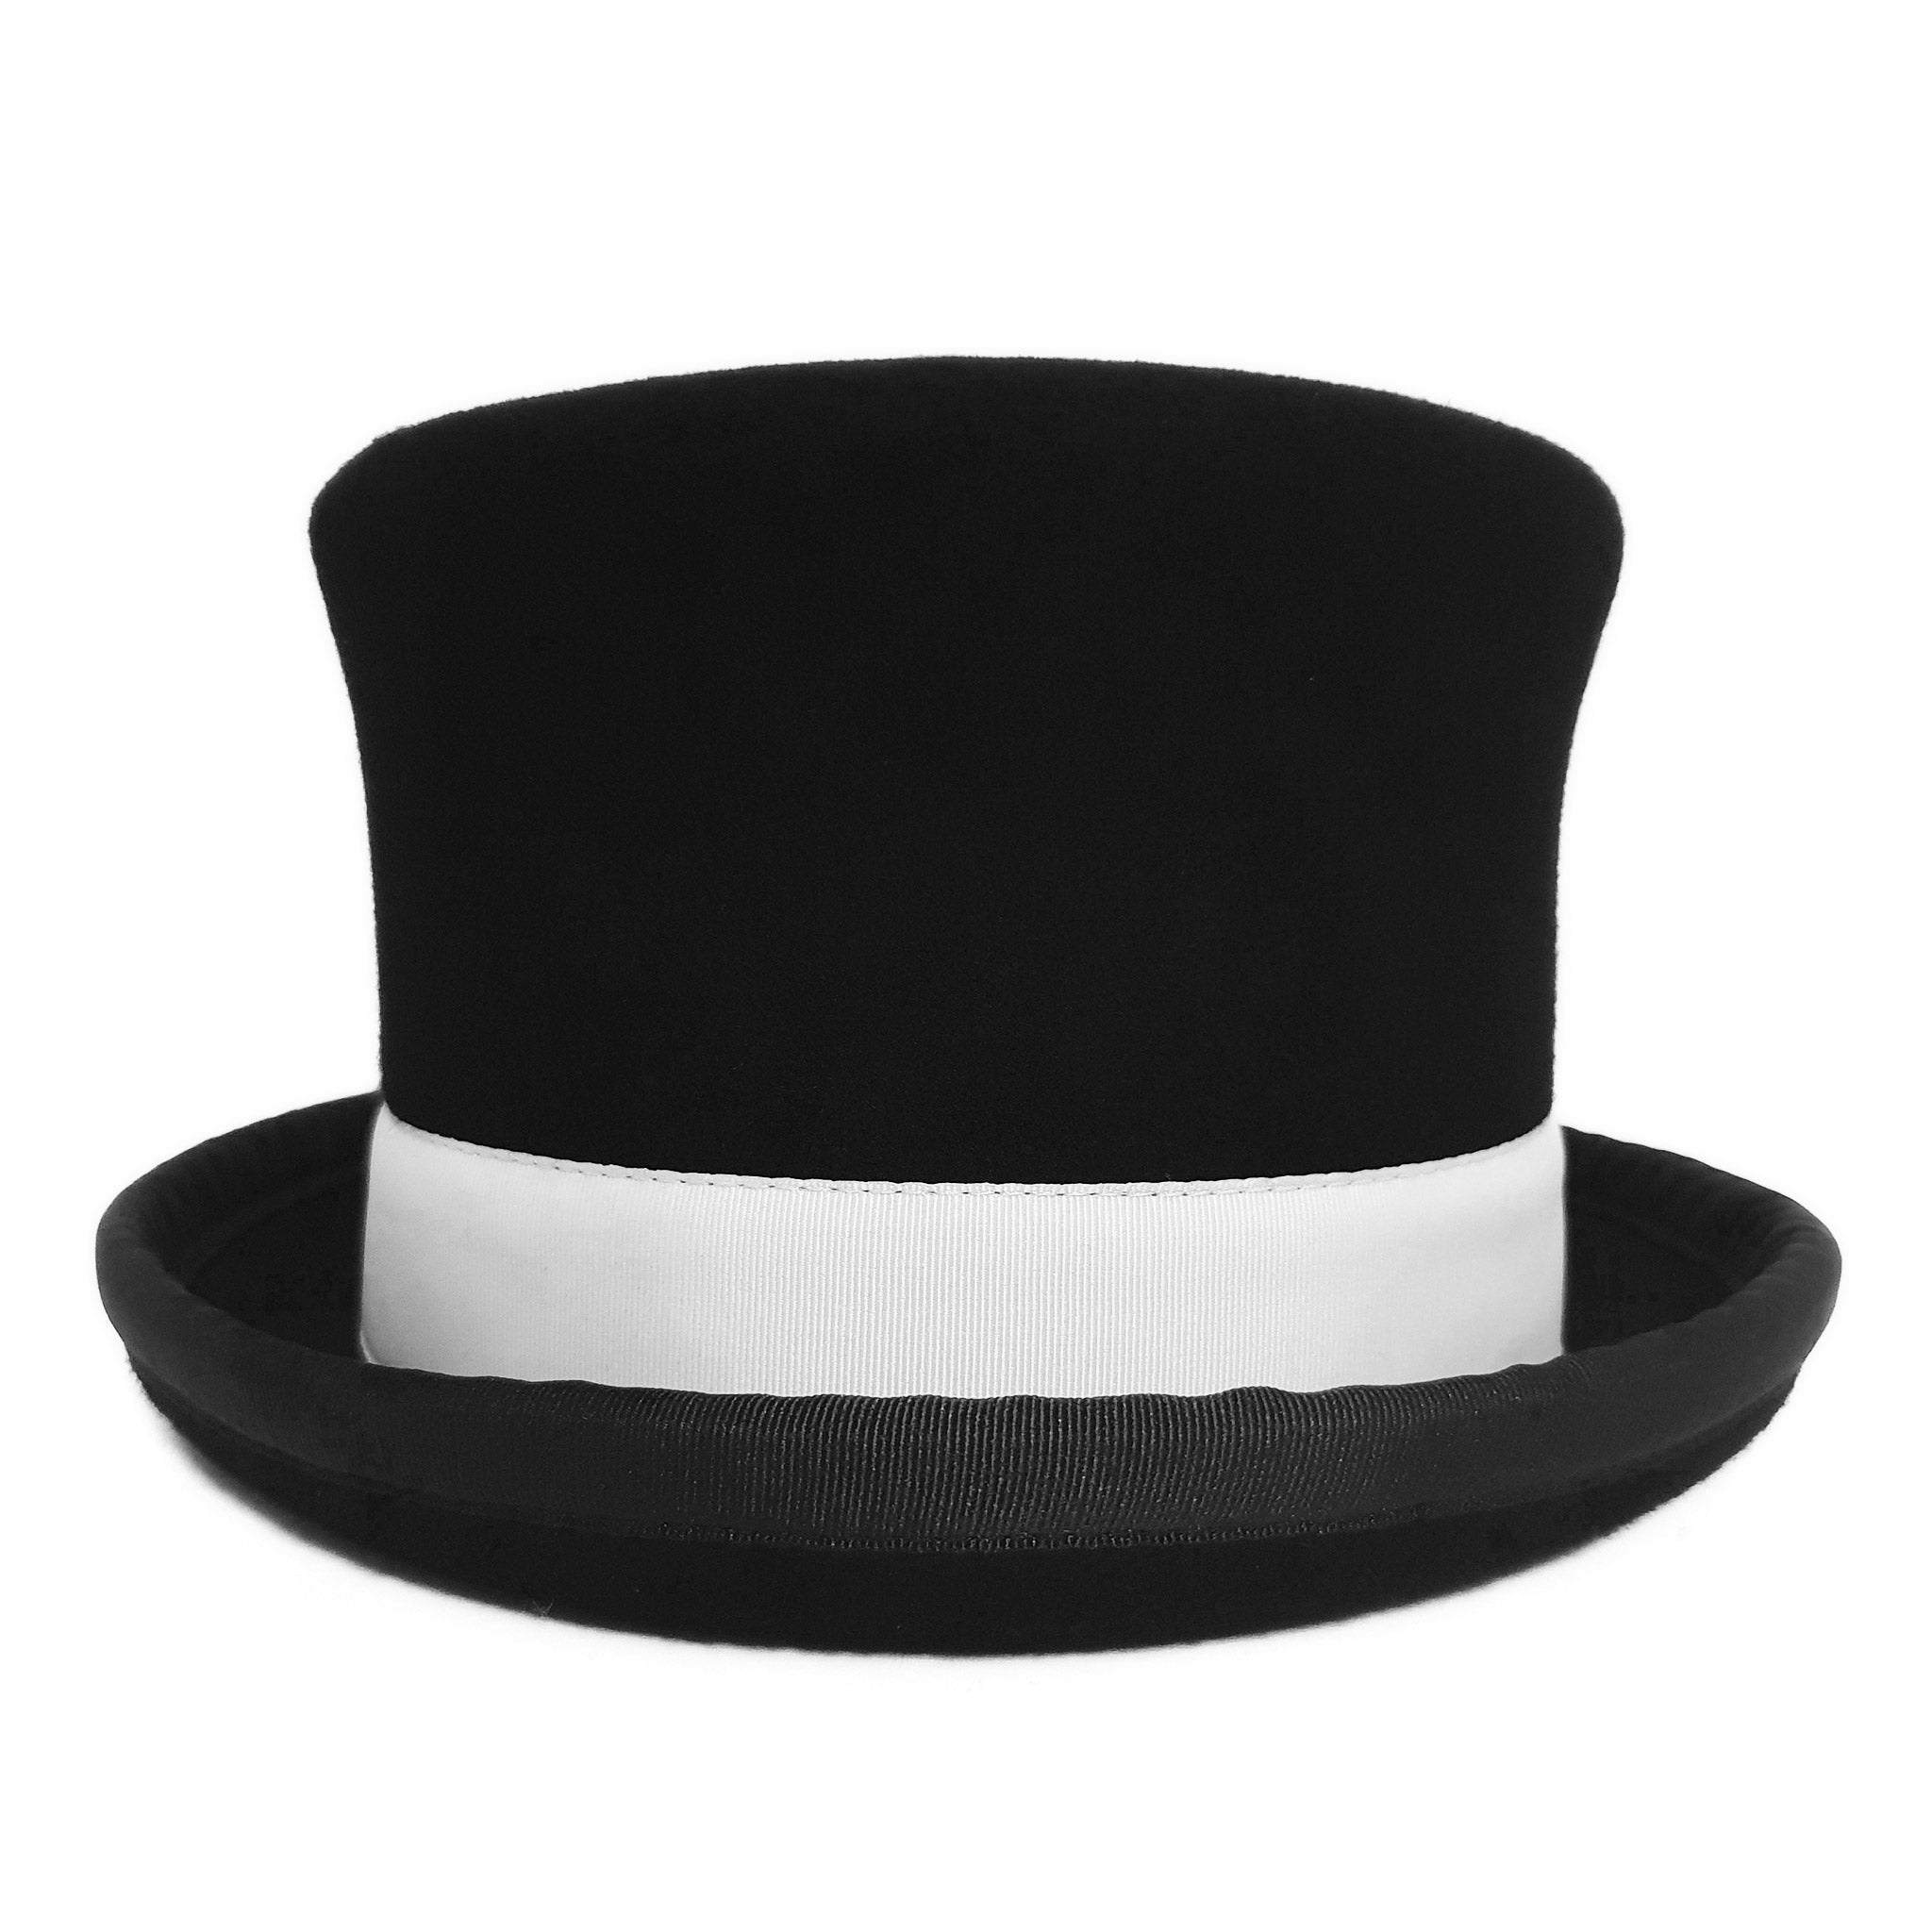 Juggle Dream Juggling Top Hat - Black with White Trim